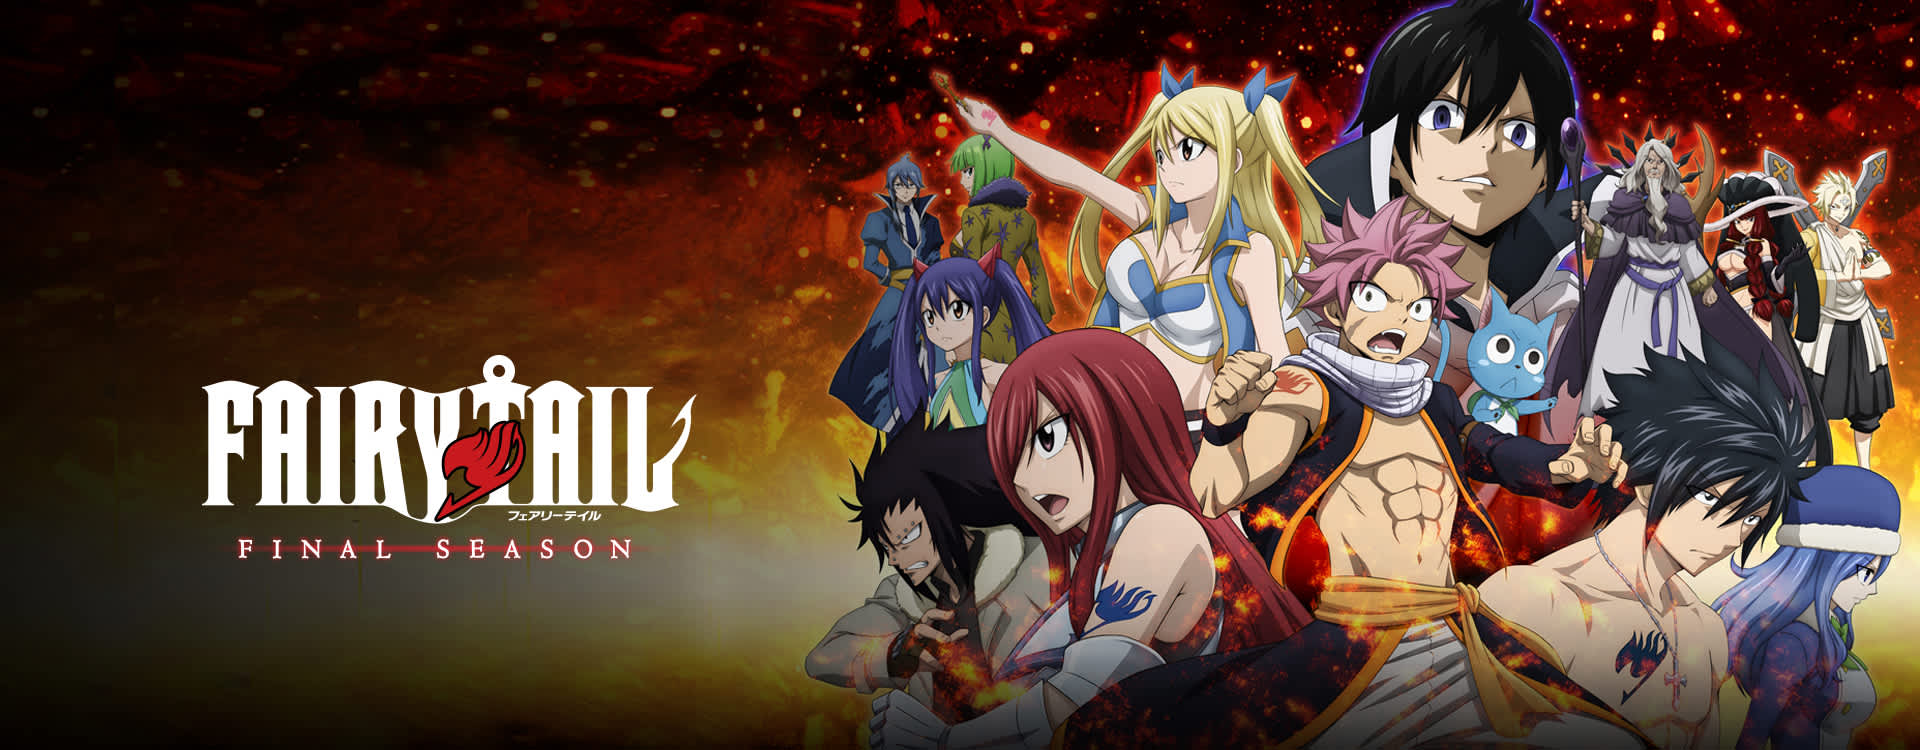 fairy tail episode 176 download